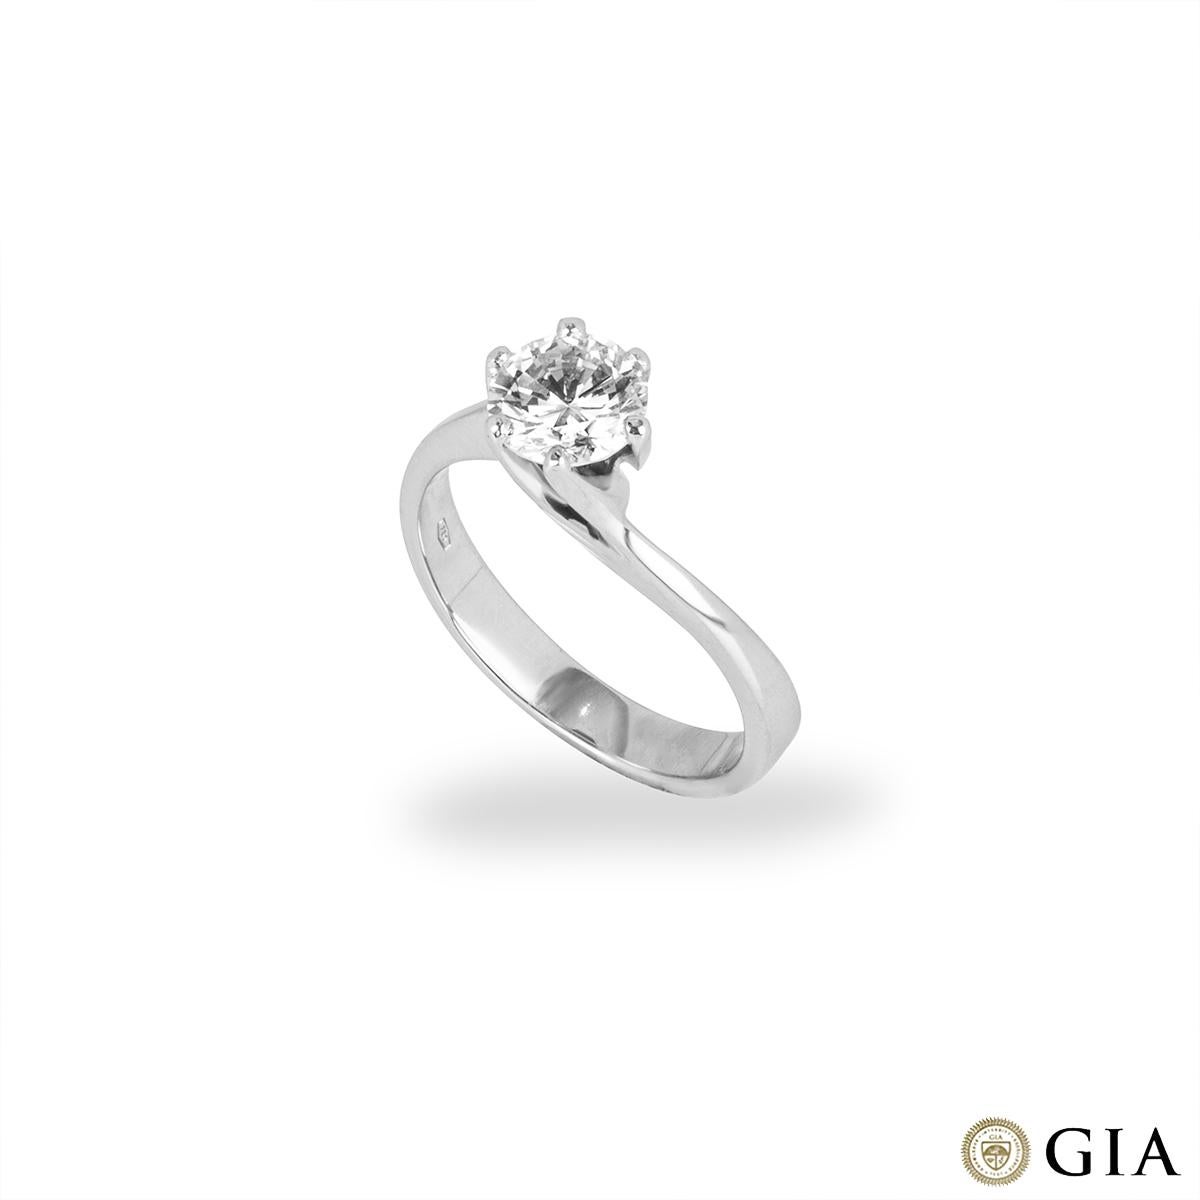 An elegant 18k white gold diamond engagement ring. The solitaire comprises of a twisted central 6 claw mount set with a round brilliant cut diamond weighing 1.07ct, J colour and SI1 clarity. The ring is currently a UK size N/ US size 6 1/2 but can